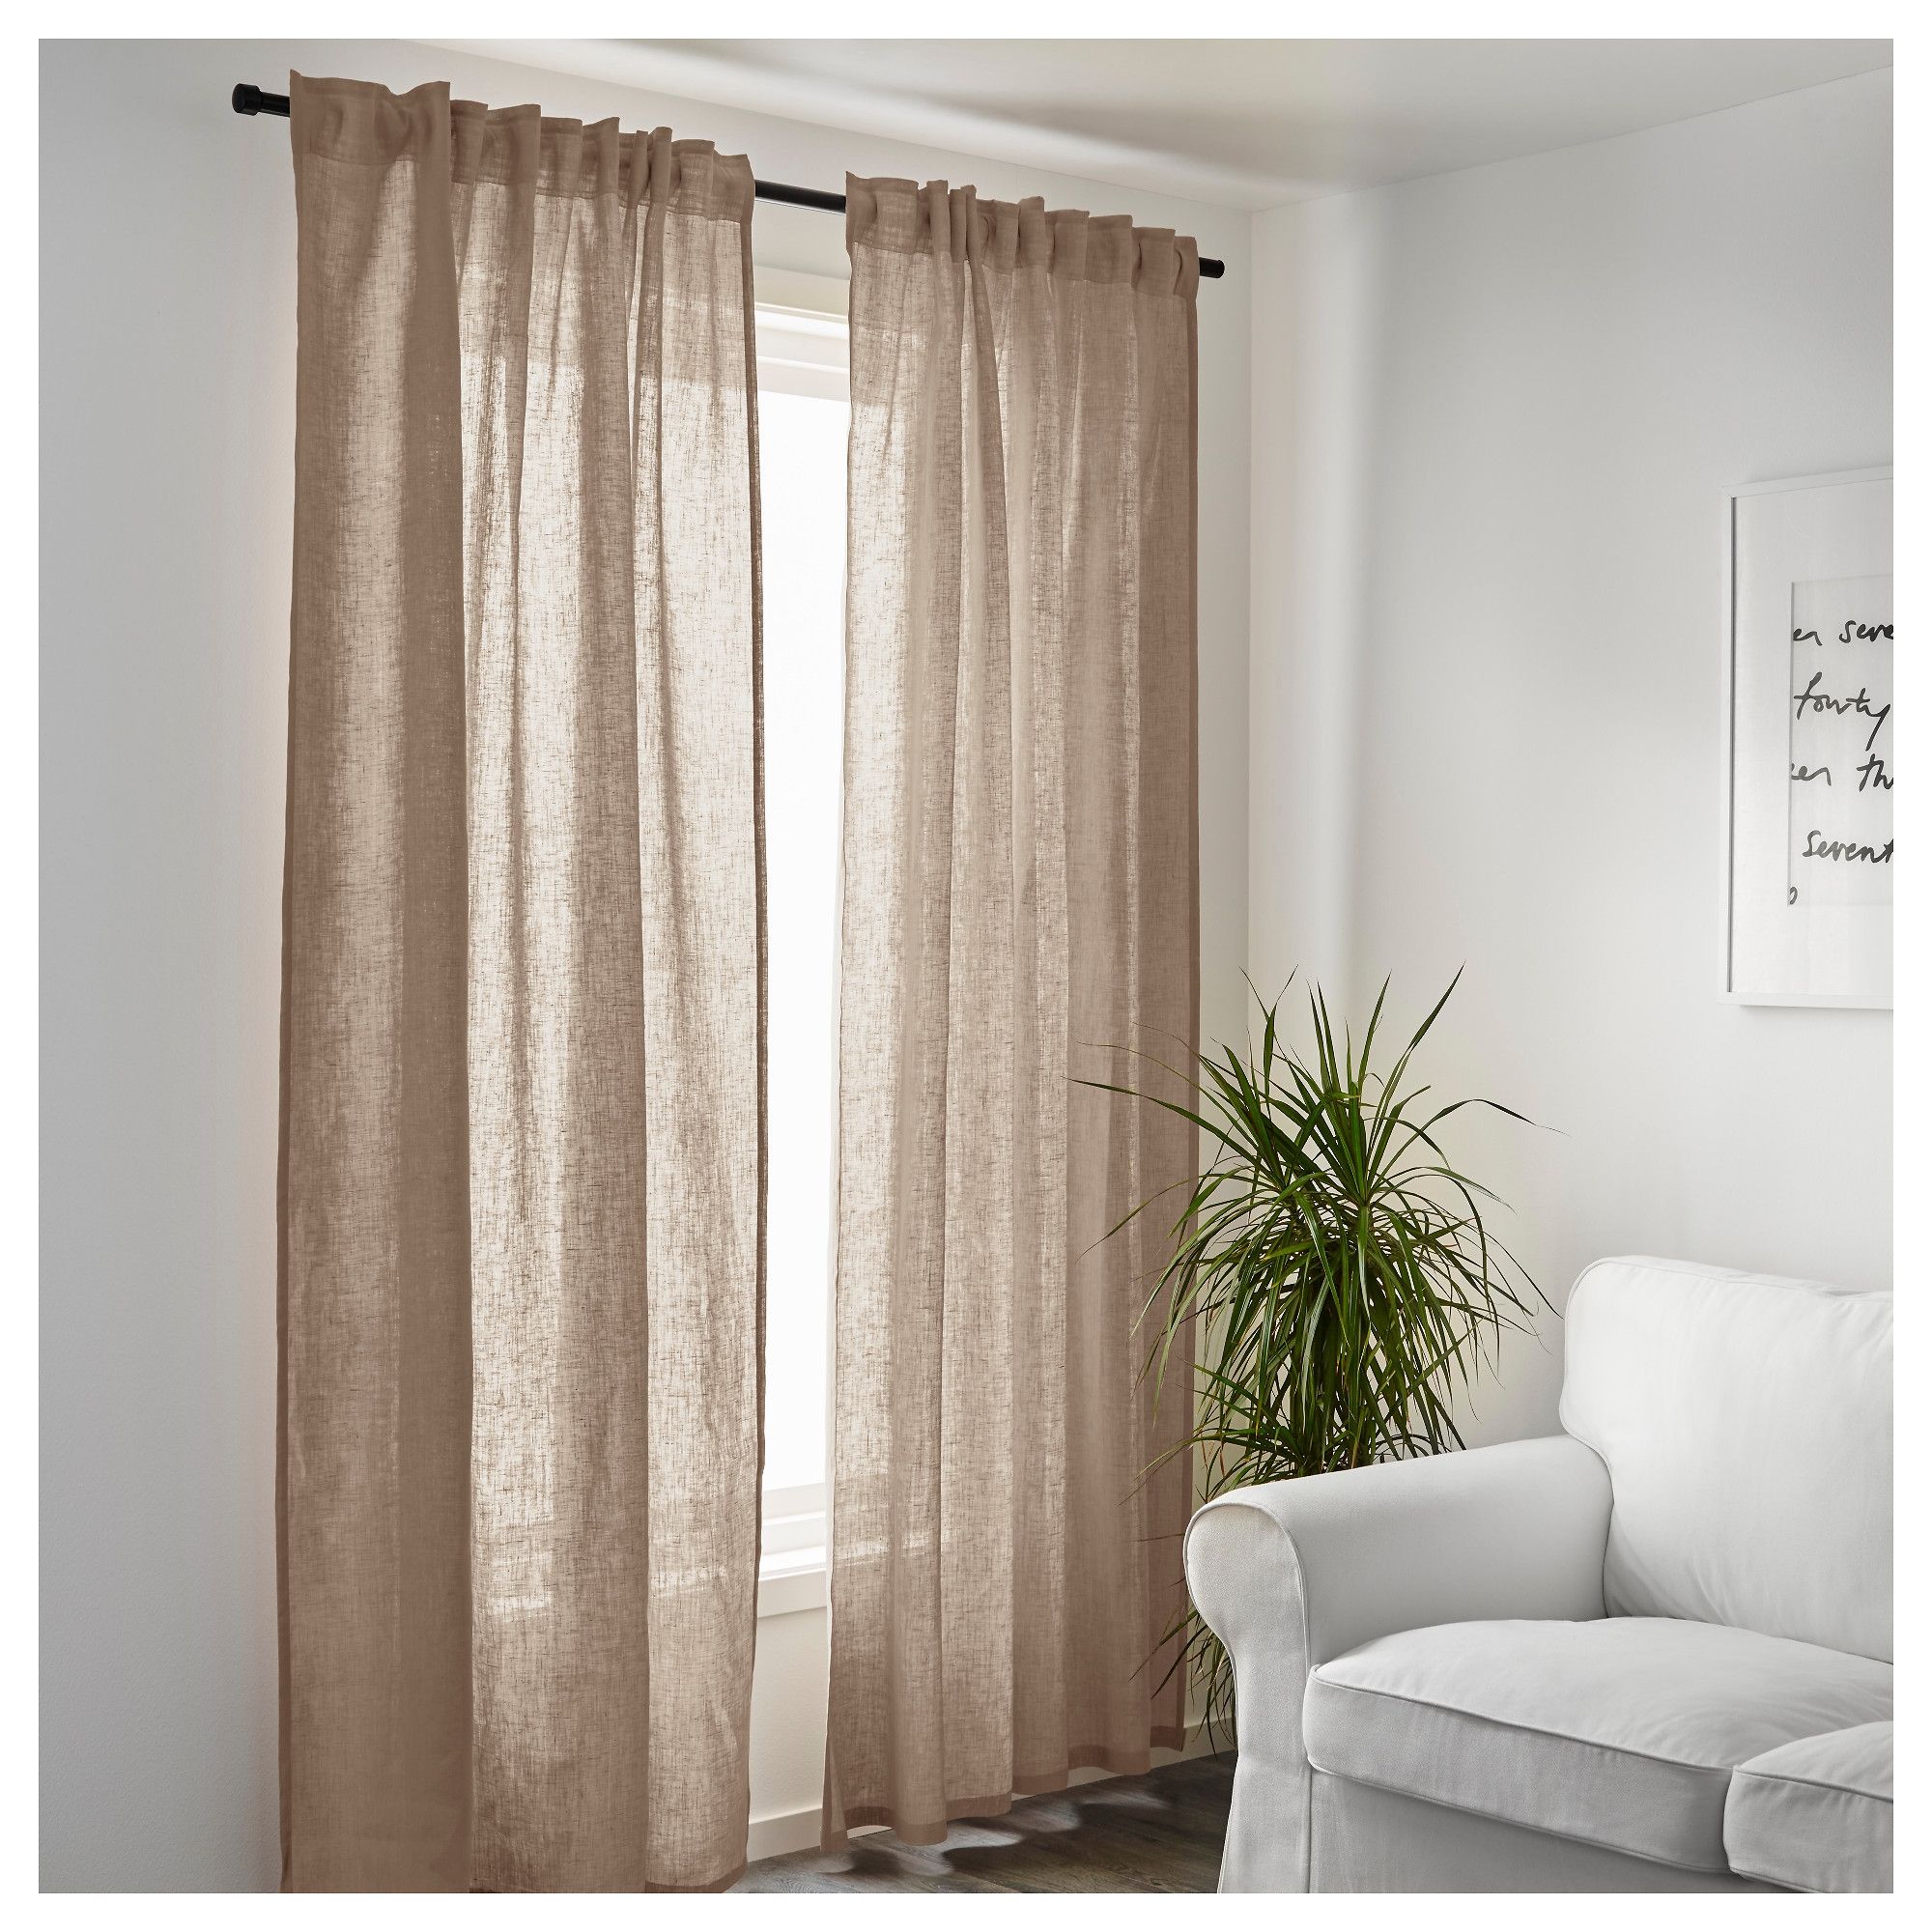 Beige Linen Curtains Gordyn Within Linen Grommet Curtains (View 9 of 25)